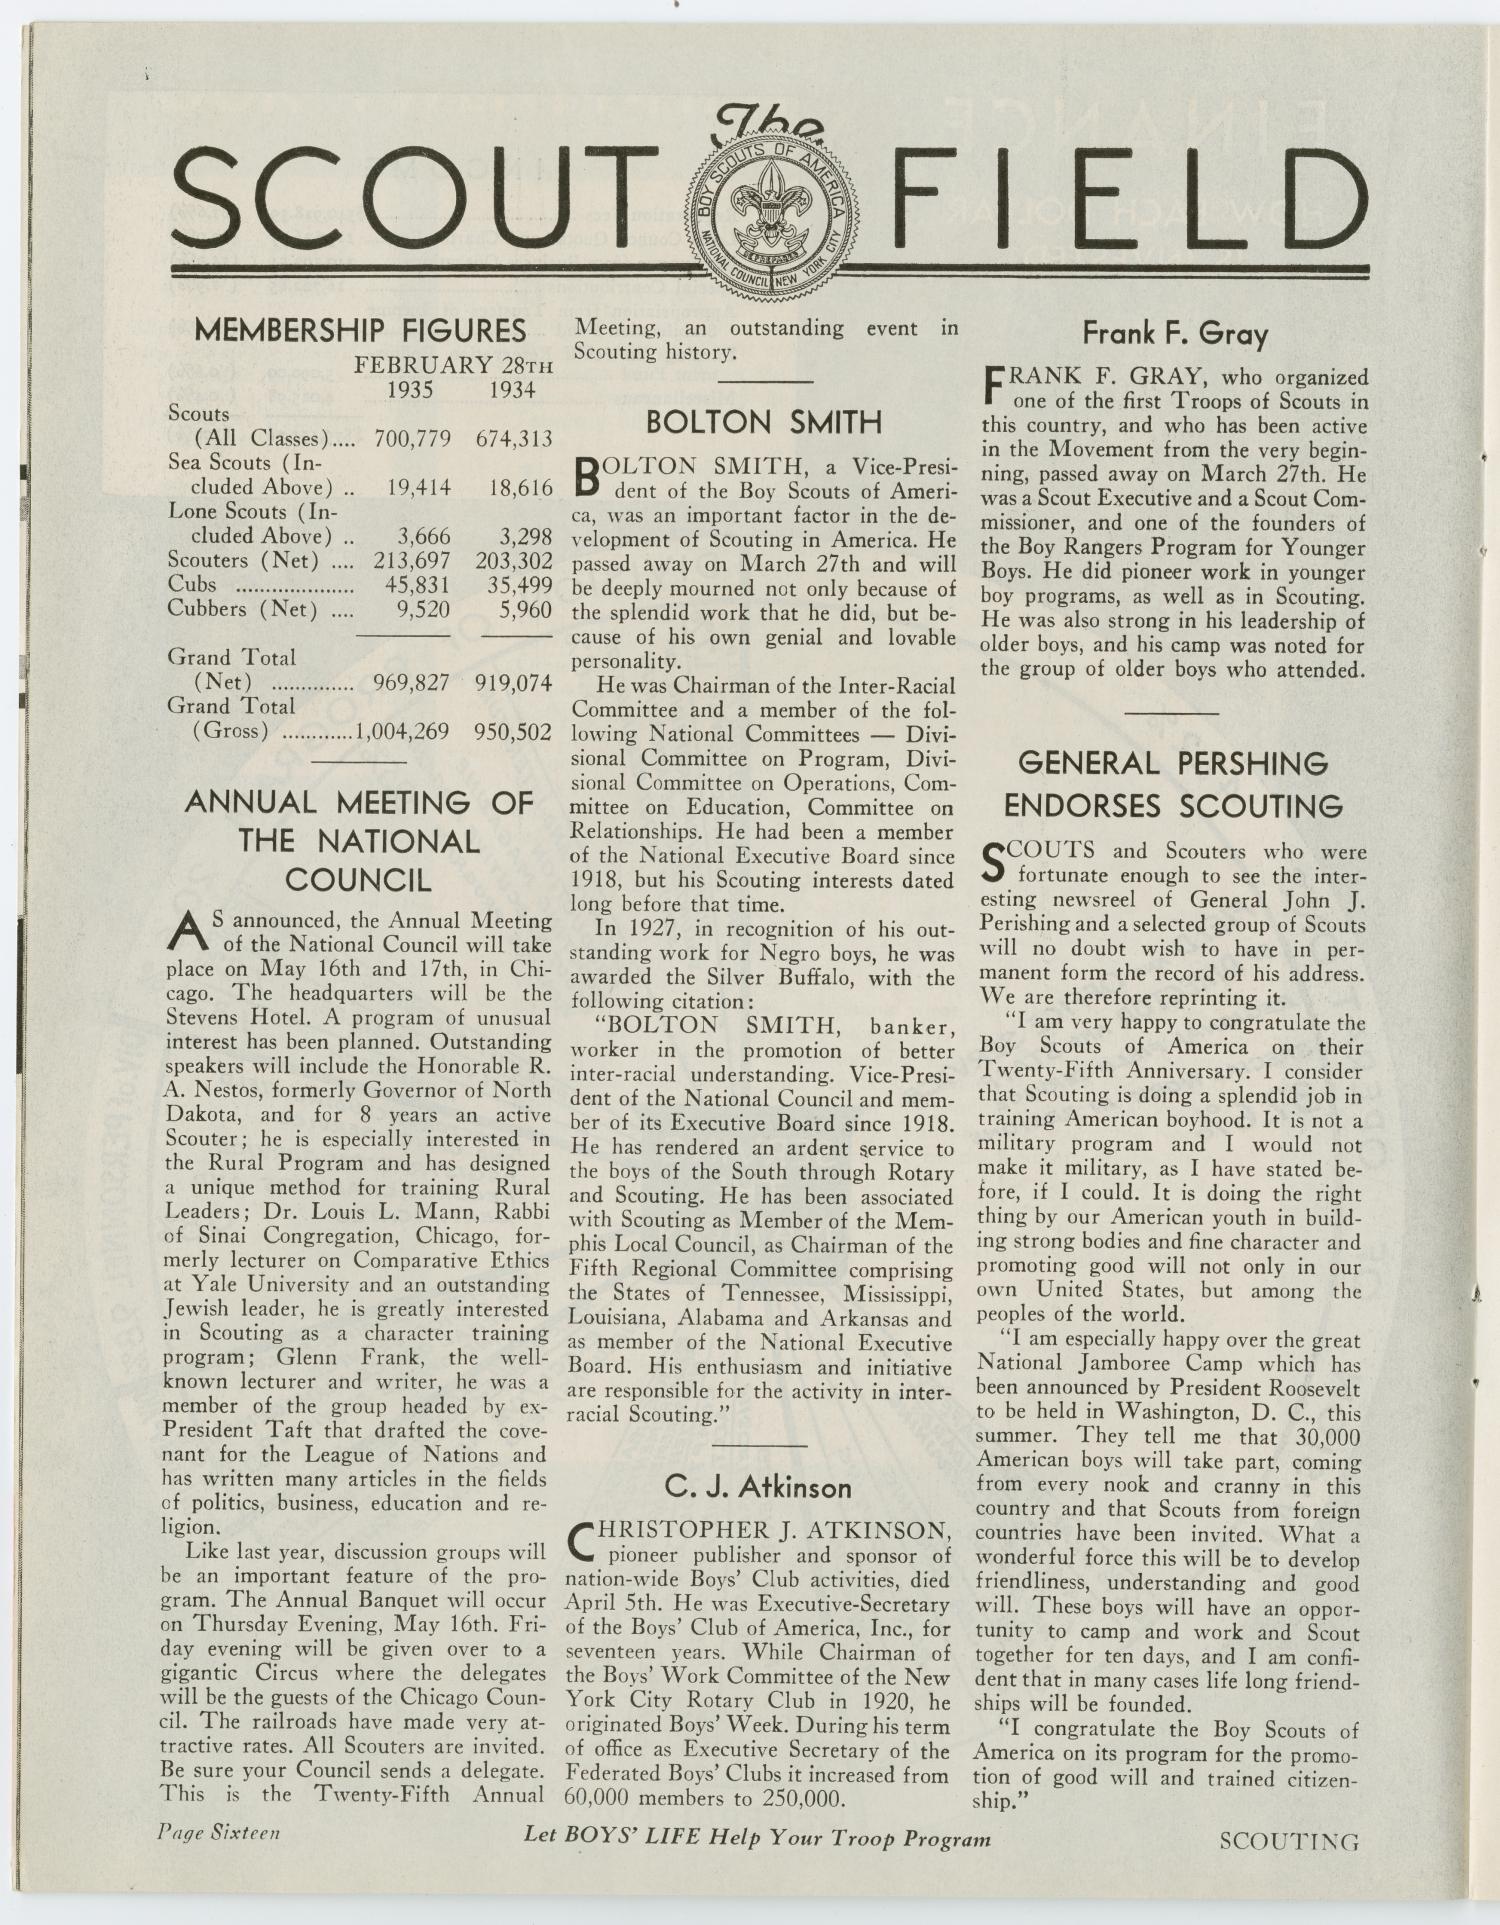 Scouting, Volume 23, Number 5, May 1935
                                                
                                                    16
                                                